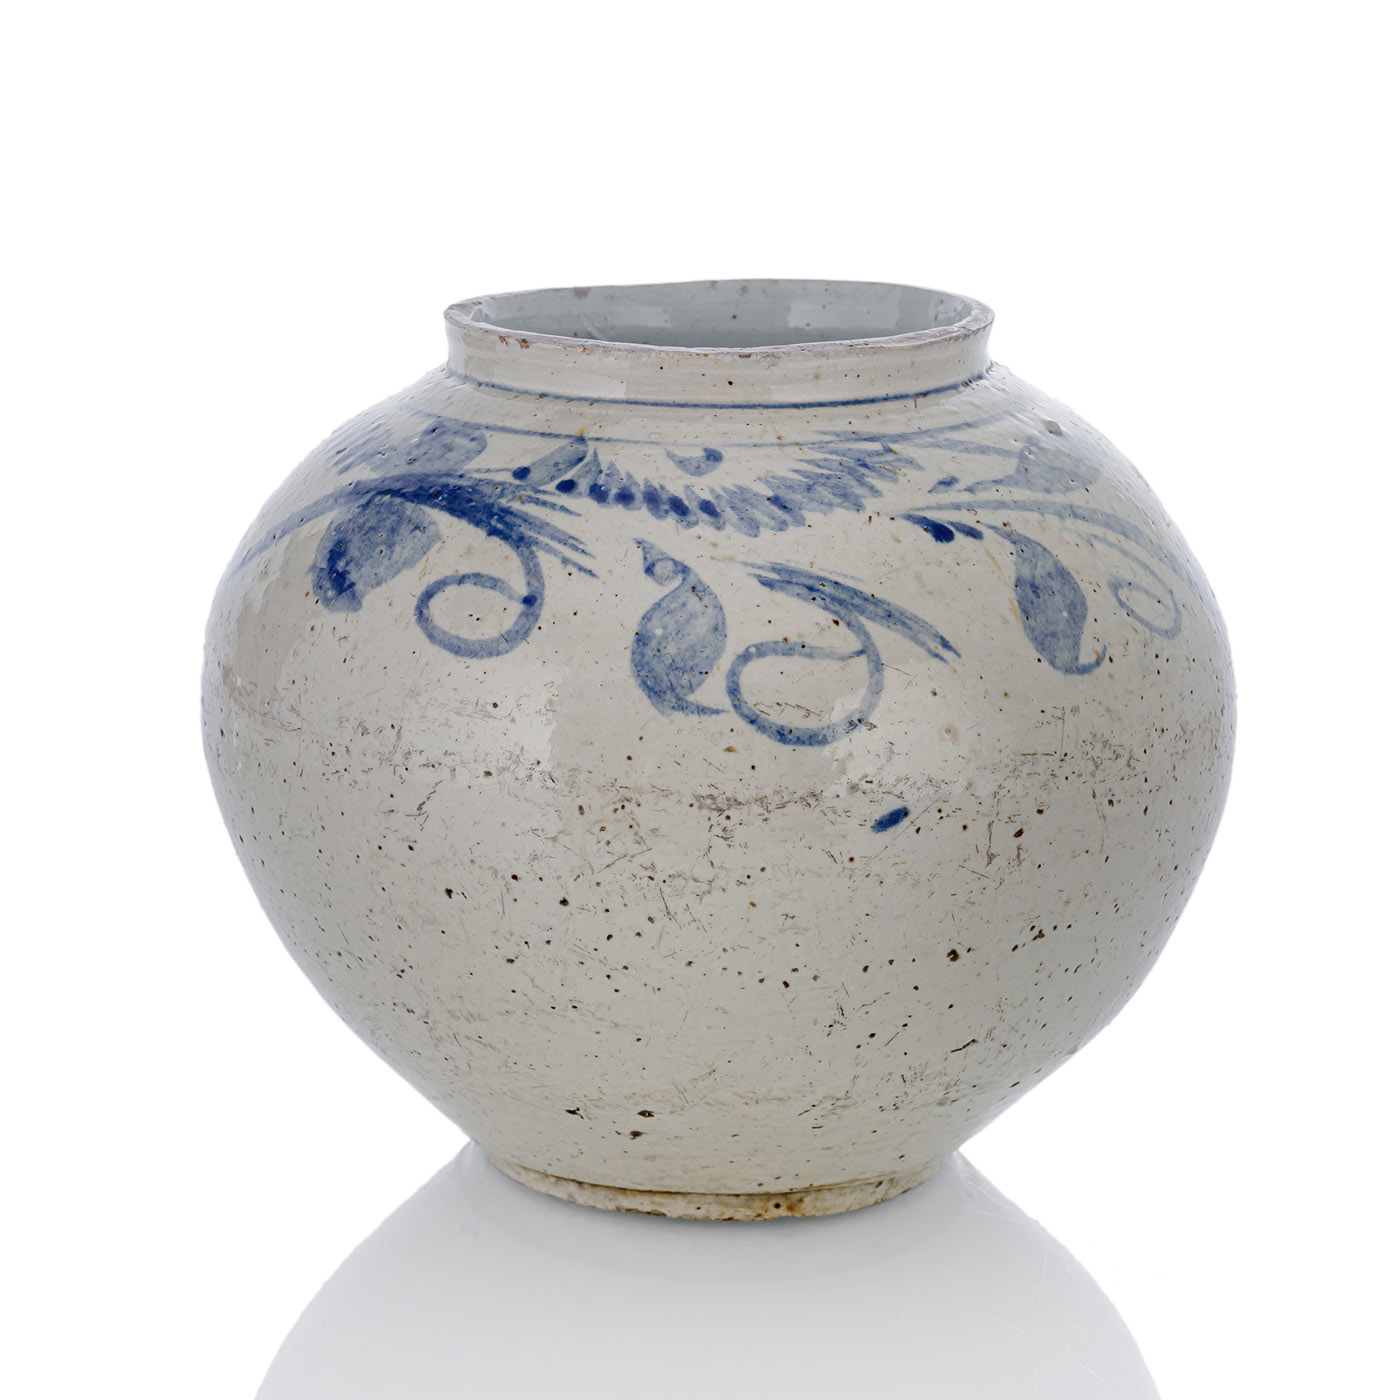 A BLUE AND WHITE JAR WITH BLOSSOMS AND SCROLLWORK